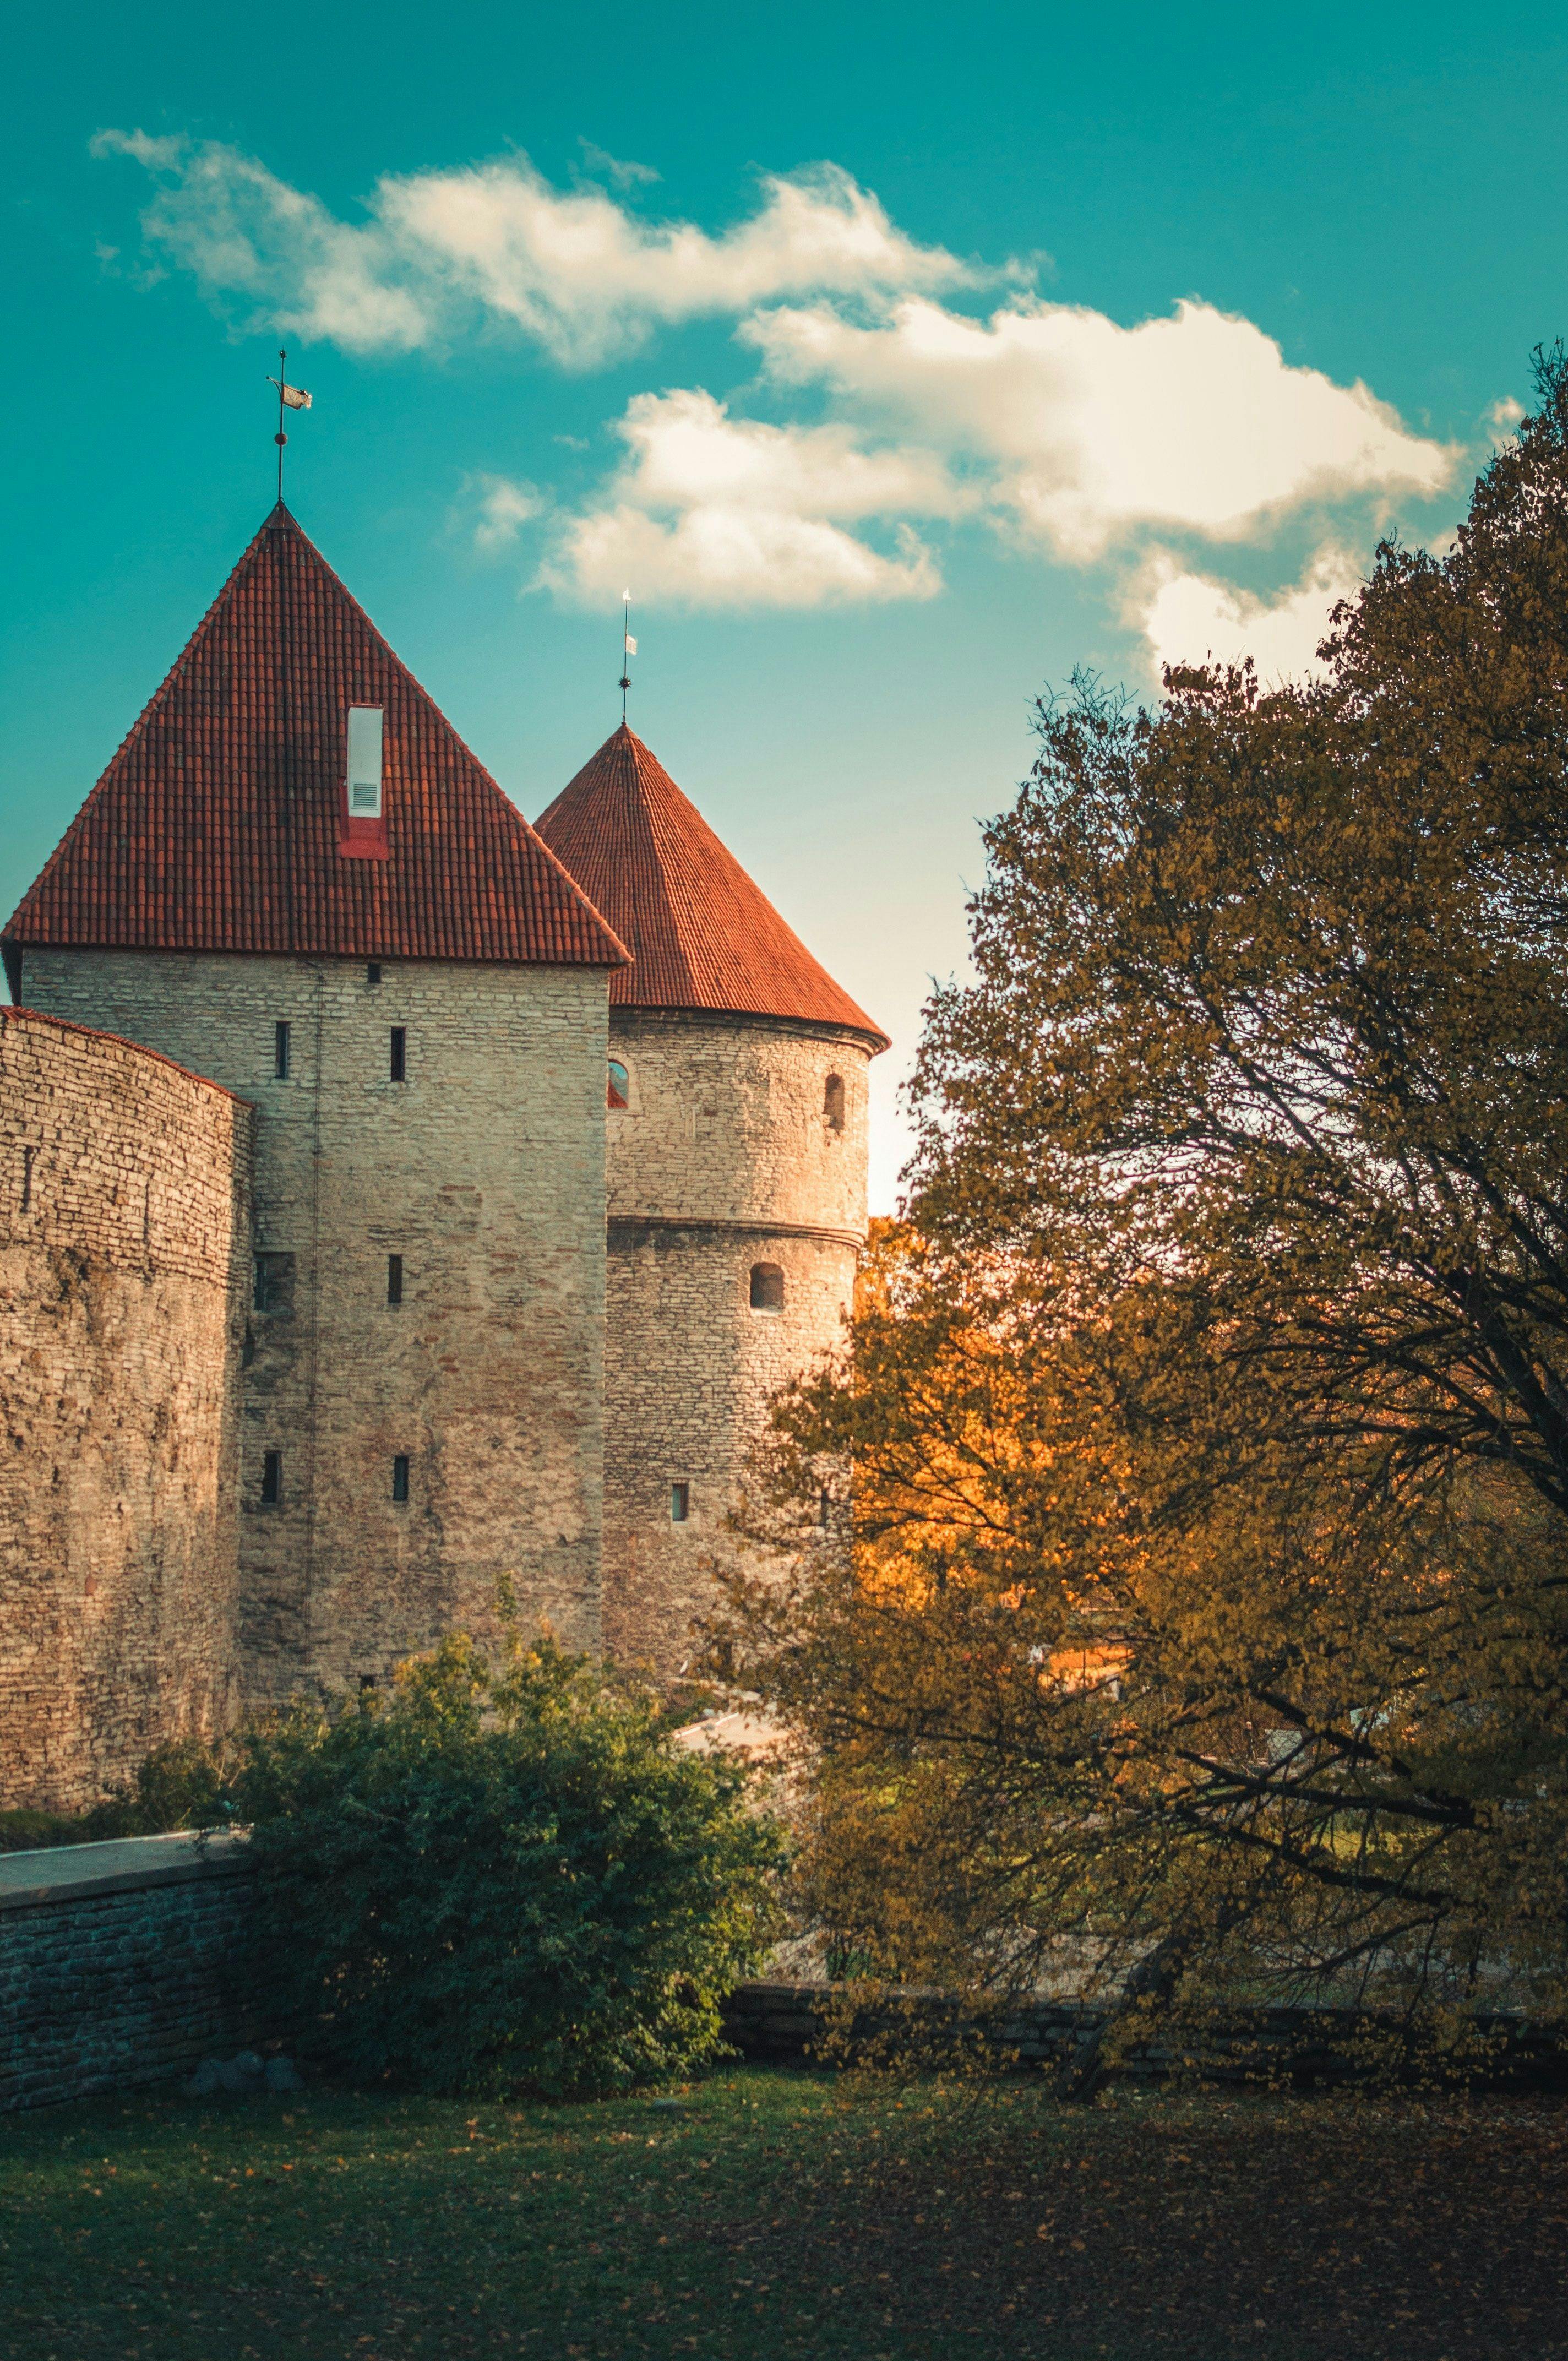 Medieval towers and city wall in Tallinn Old Town.